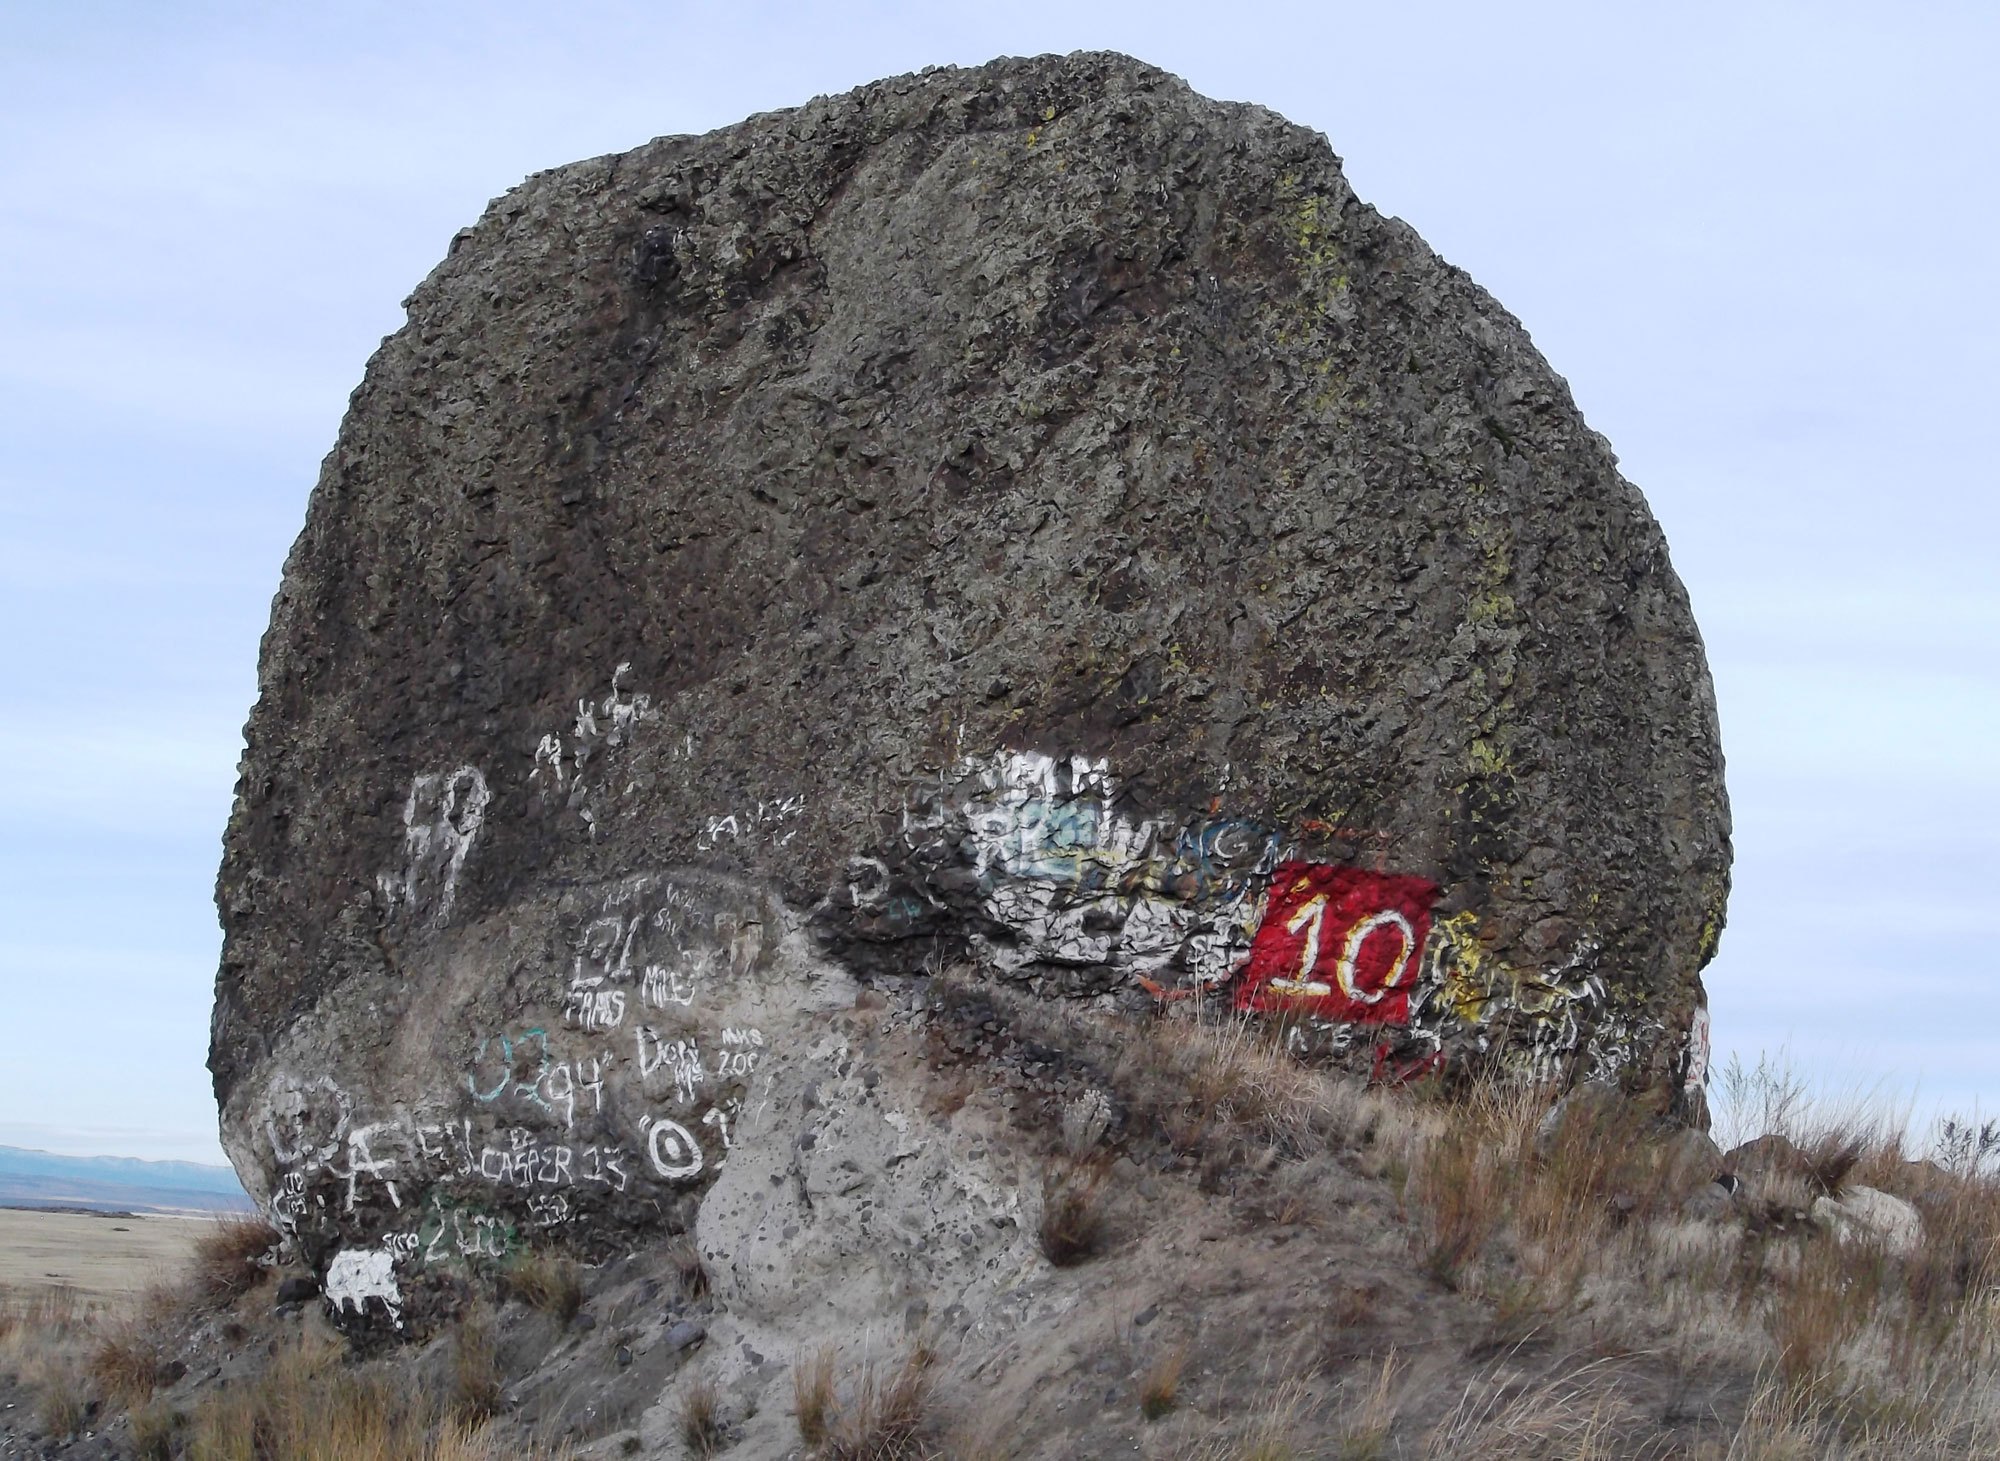 Photo of Yeager rock, a large glacial erratic in Washington. The photo shows a large, round, gray boulder sitting on a small hill covered with dry grass. The lower part of the boulder is covered with graffiti.